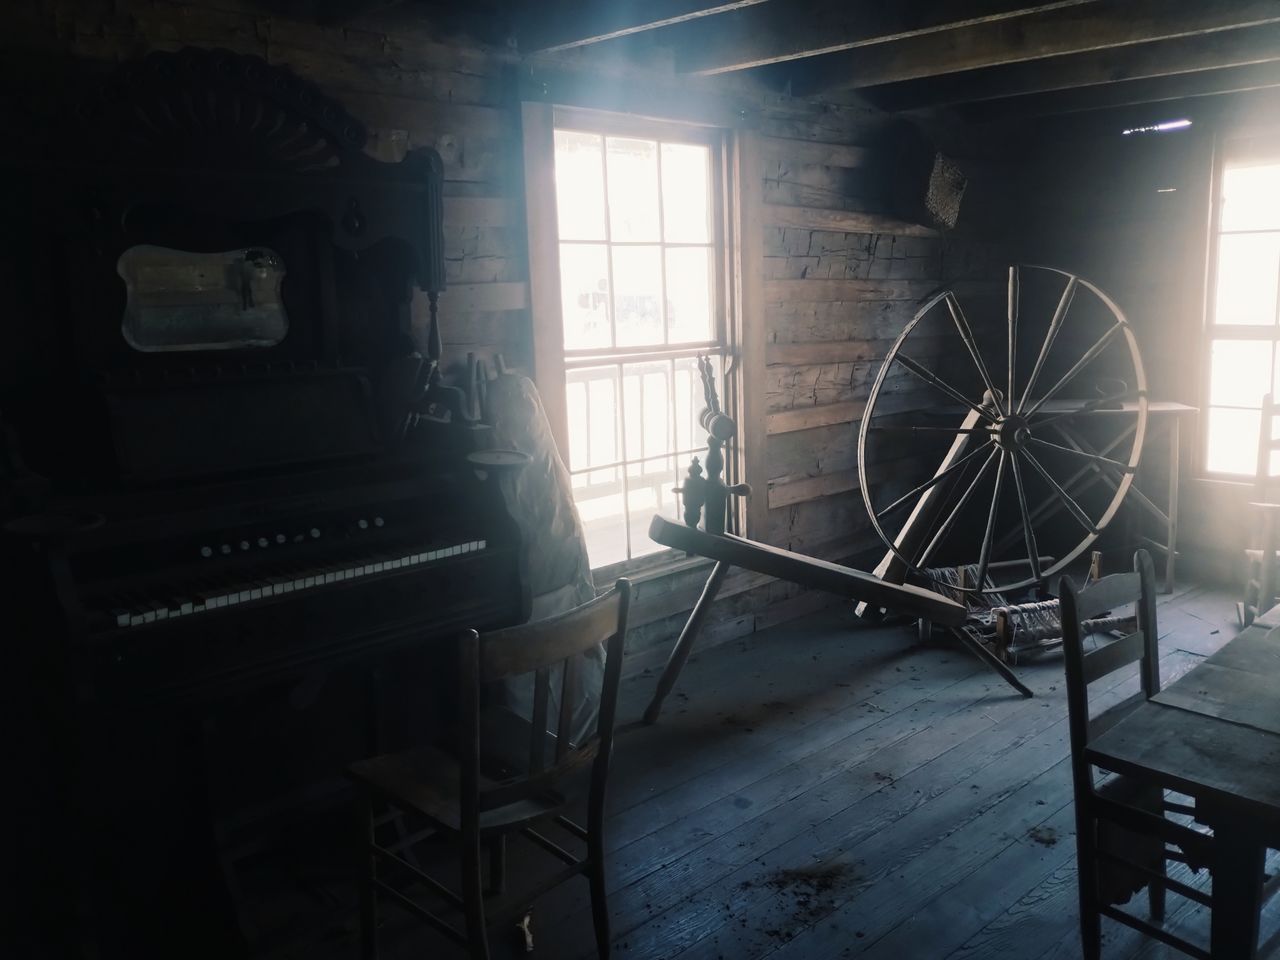 indoors, no people, darkness, window, abandoned, light, architecture, piano, screenshot, sunlight, old, building